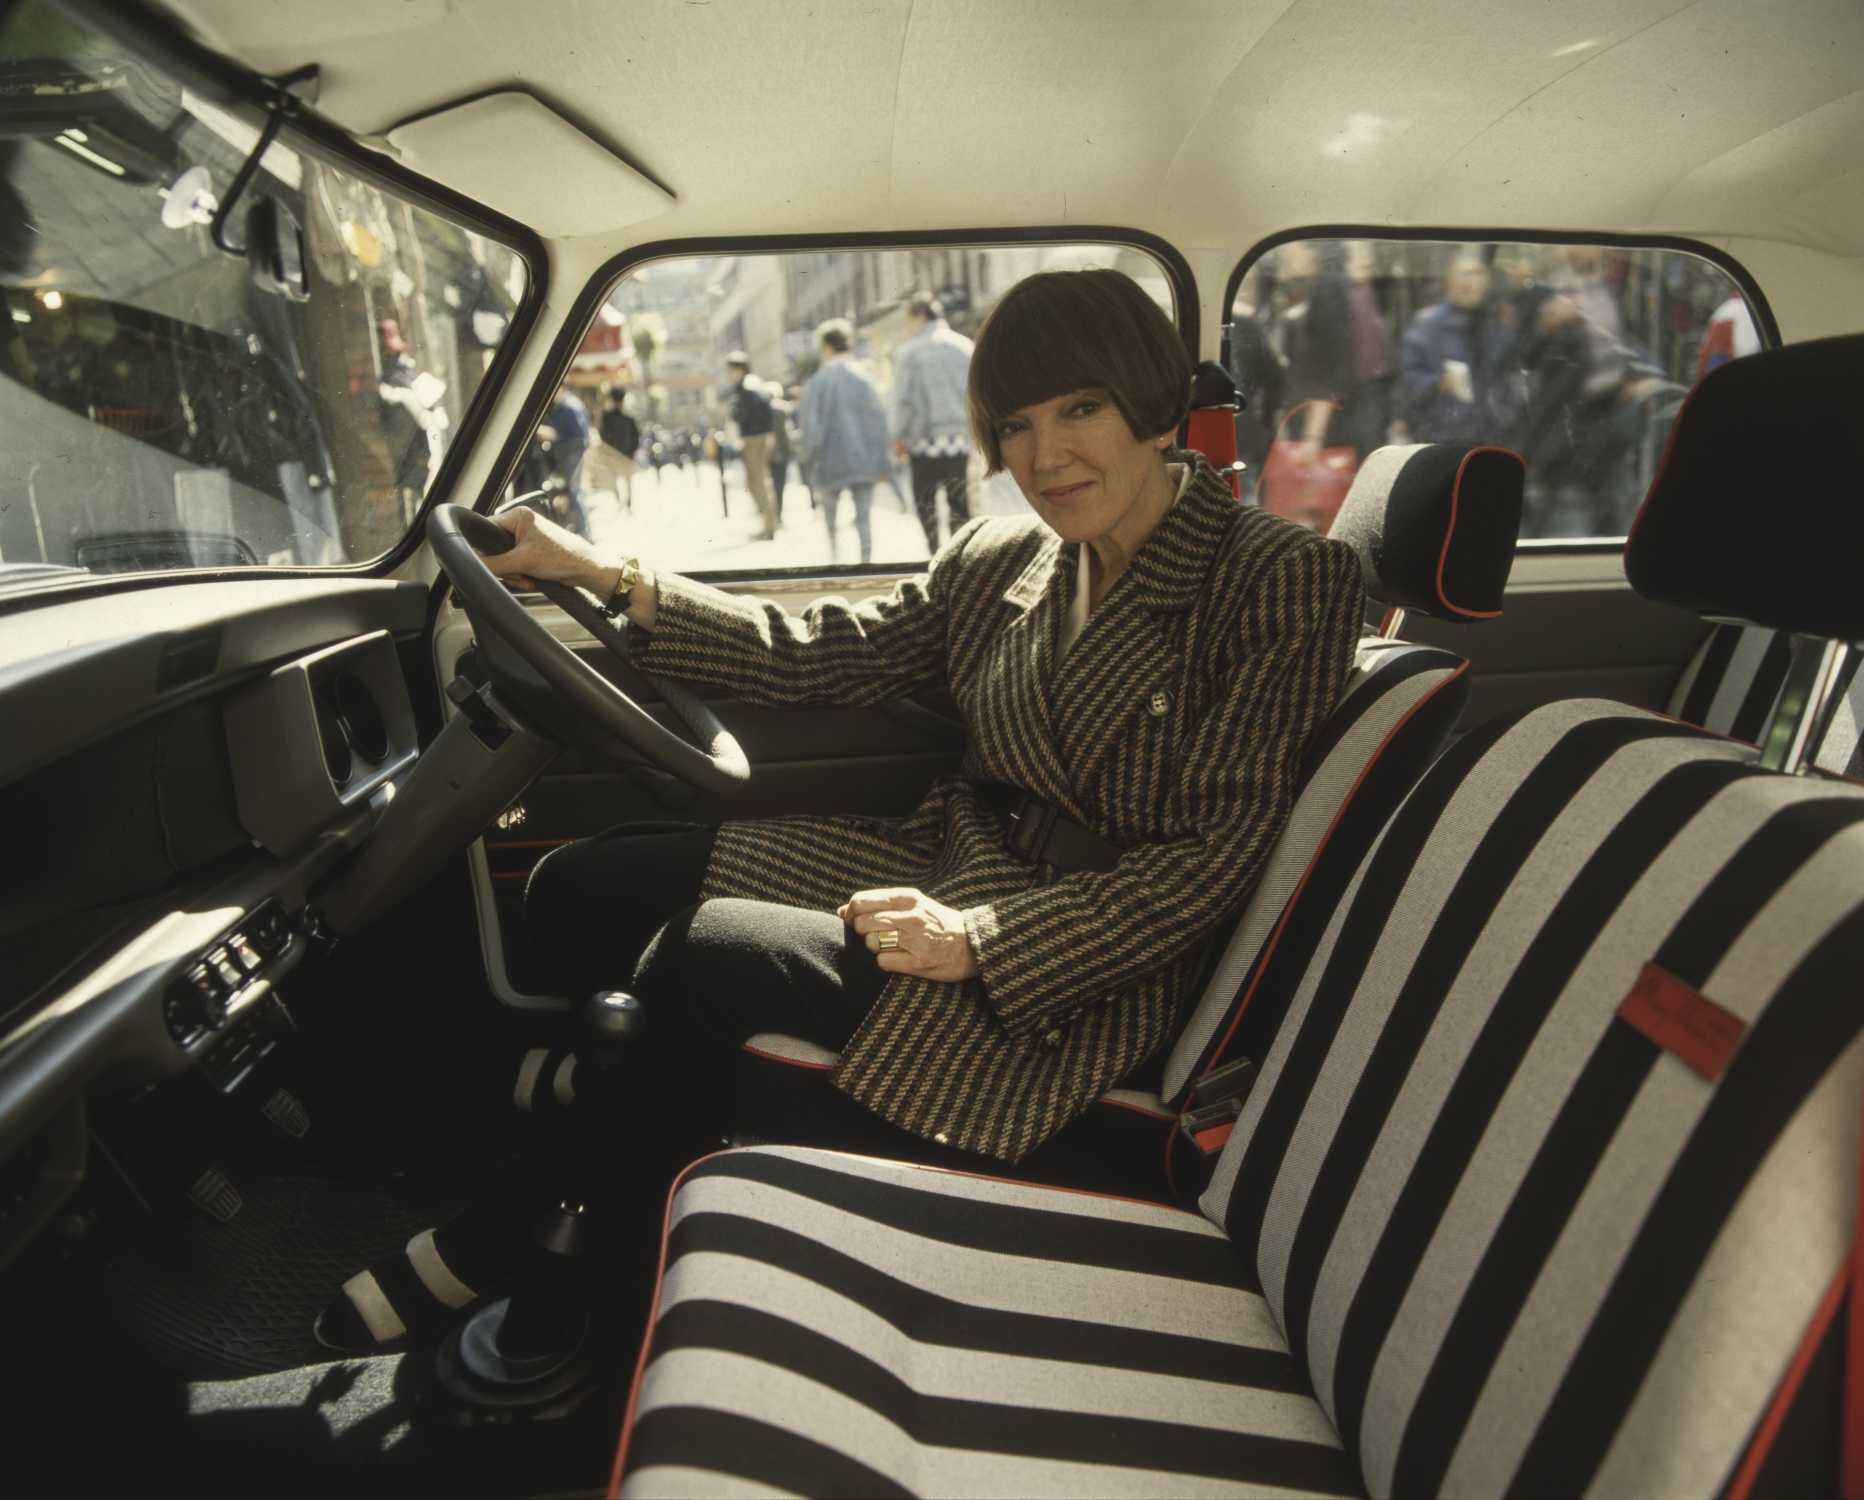 Mary Quant, pictured in her special edition ‚Mini Designer‘, 1988 (08/2019).
(Photo by BMW AG – BMW Group Archiv)